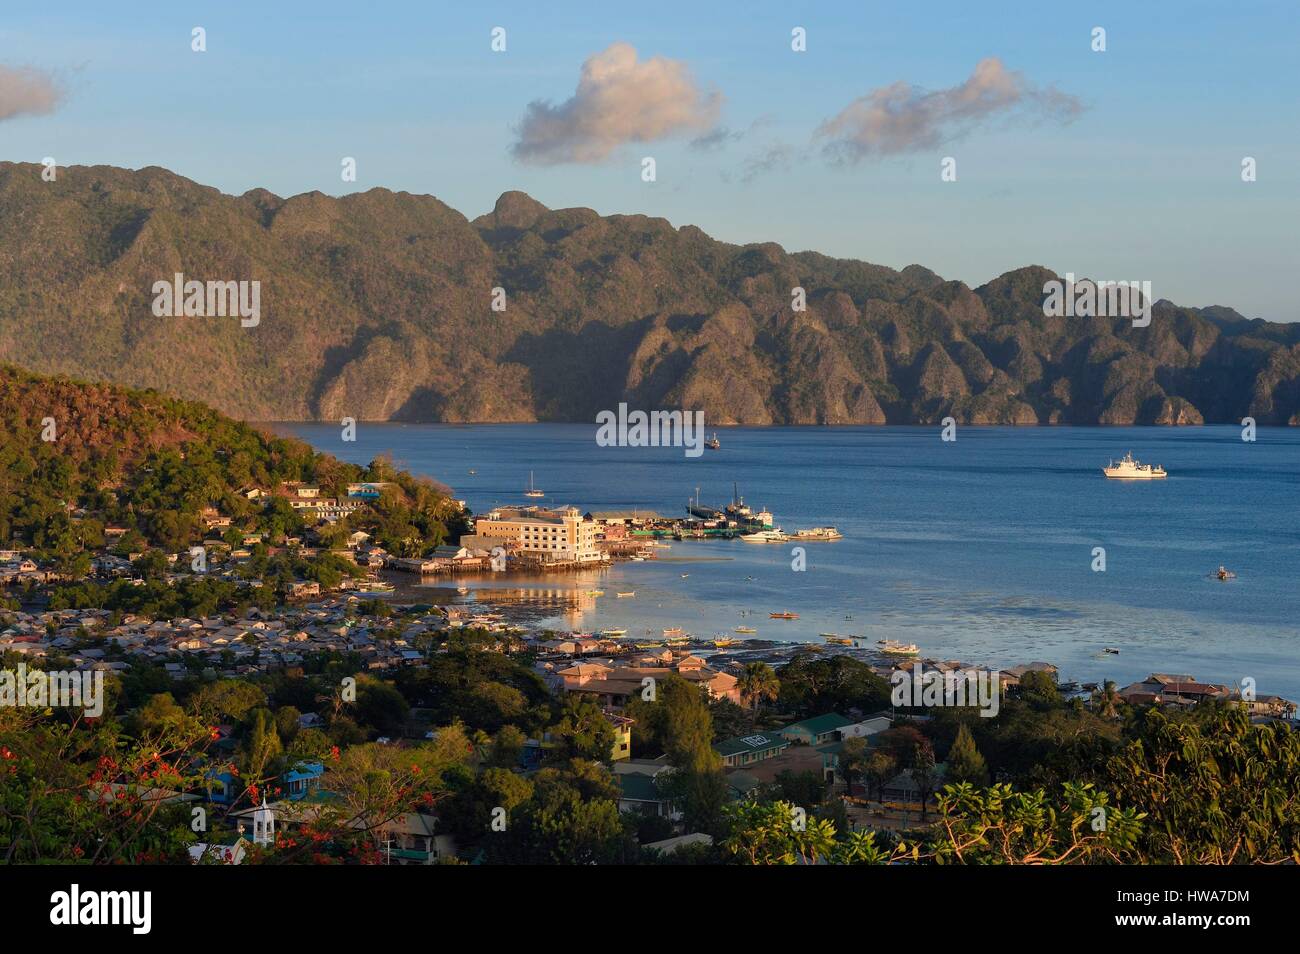 Philippines, Calamian Islands in northern Palawan, Coron Island, Coron Town and Coron Island Natural Biotic Area in the background Stock Photo